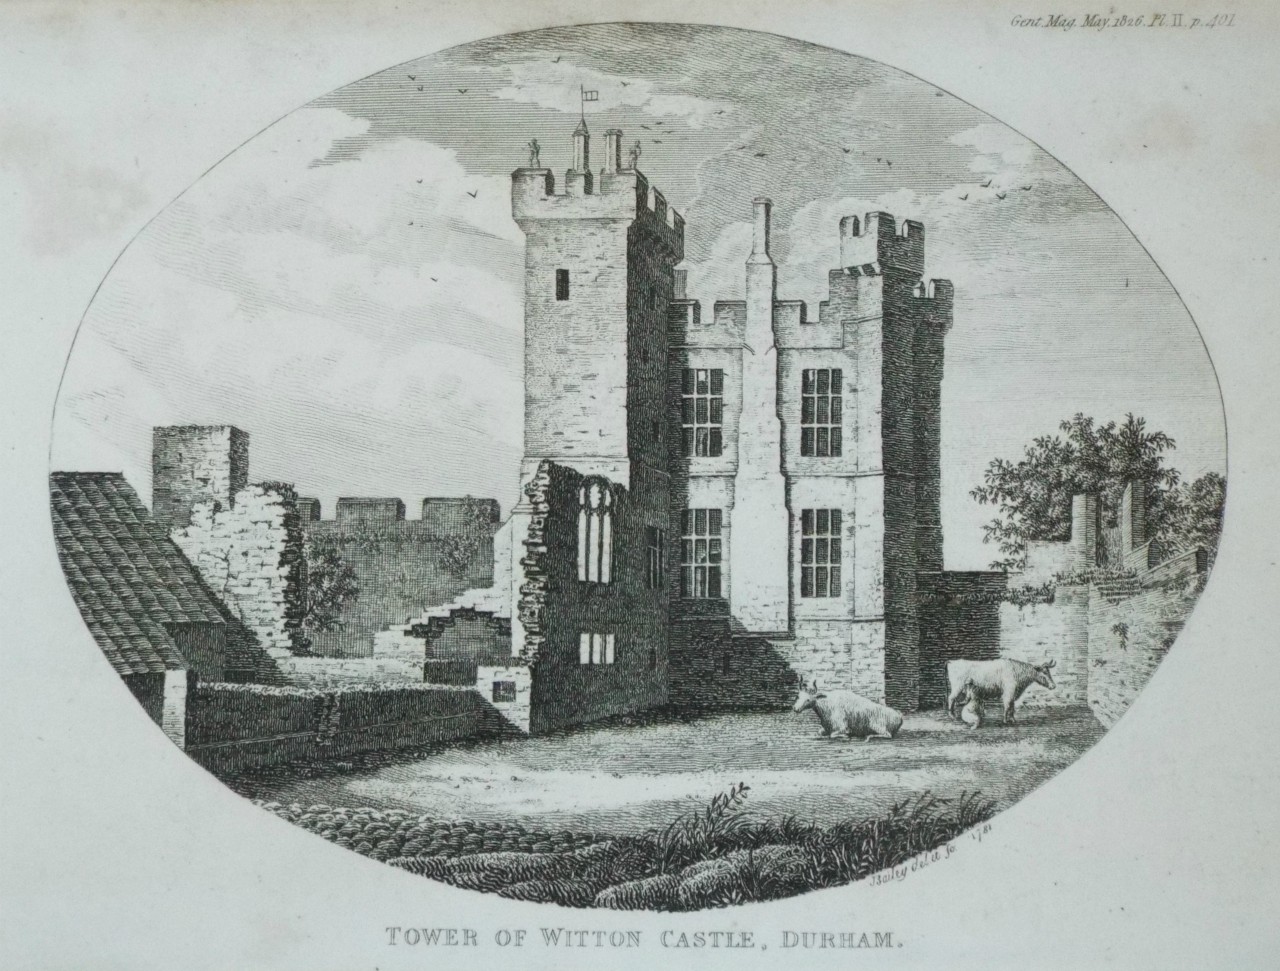 Print - Tower of Witton Castle, Durham. - 